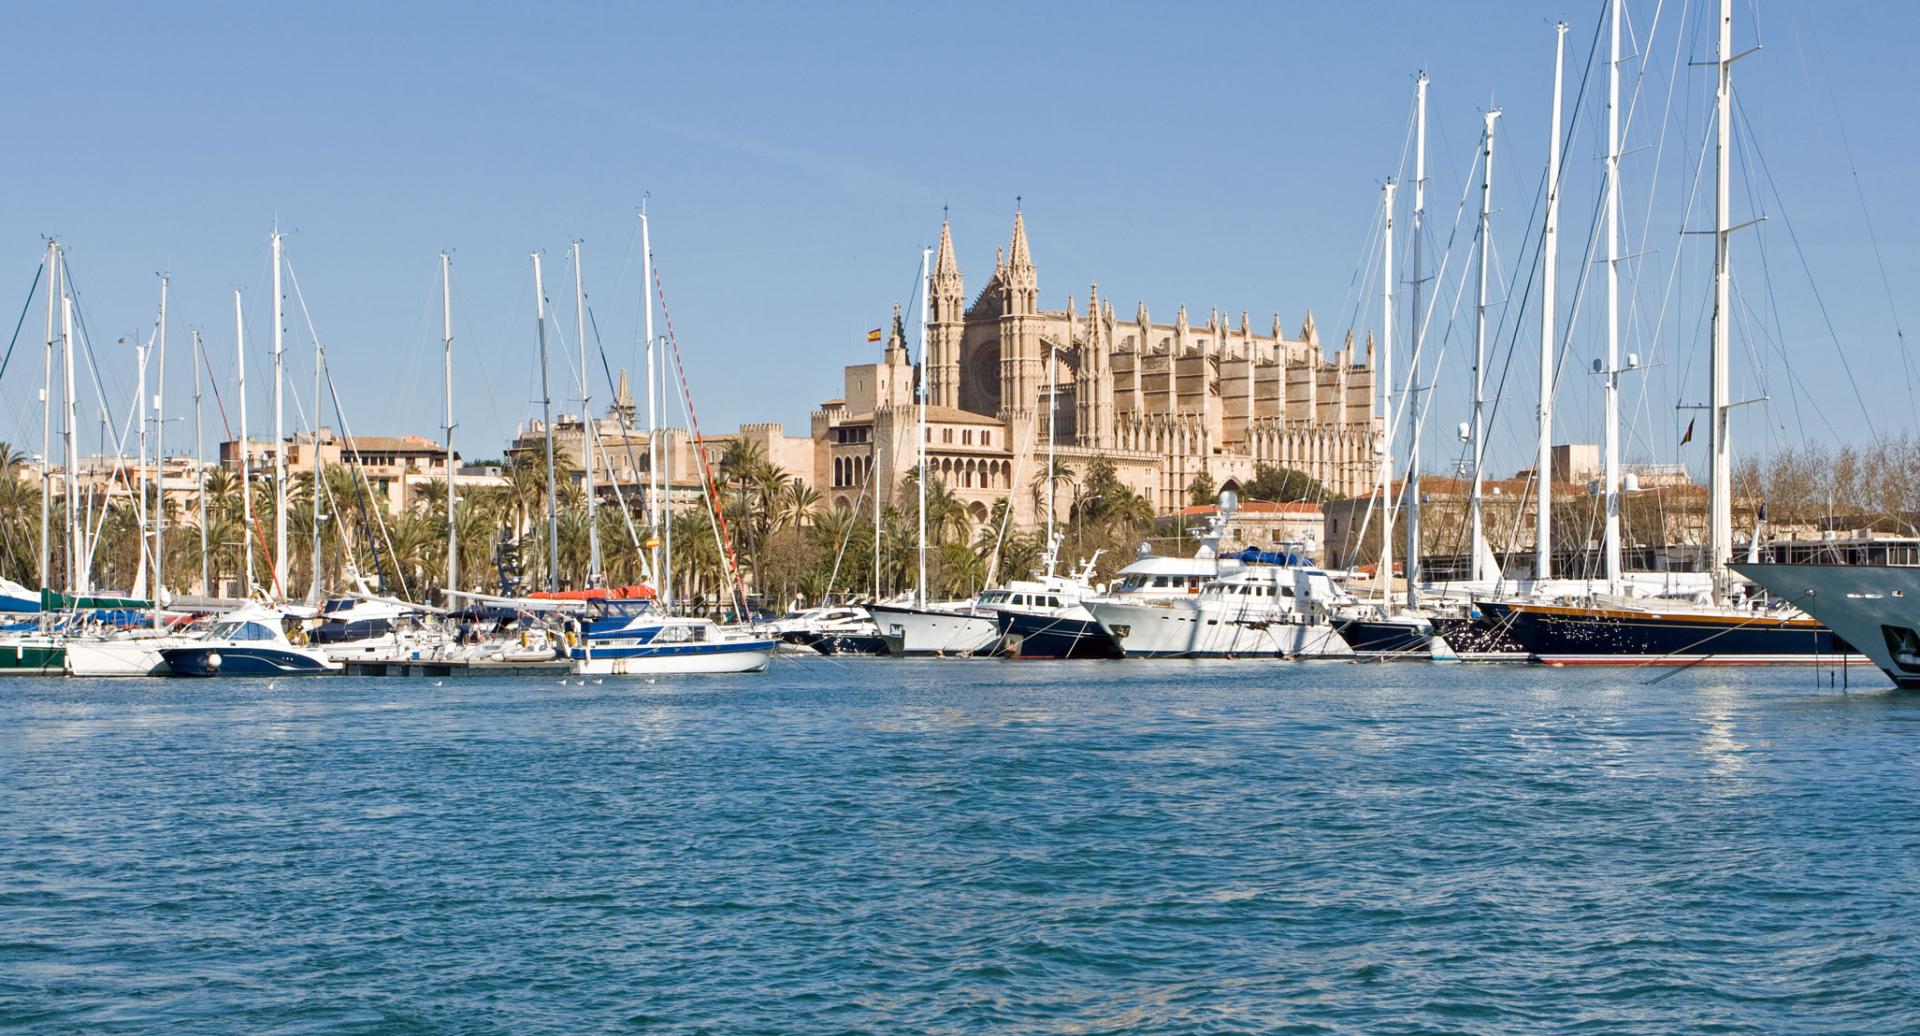 Exclusive catamaran excursions to the Bay of Palma